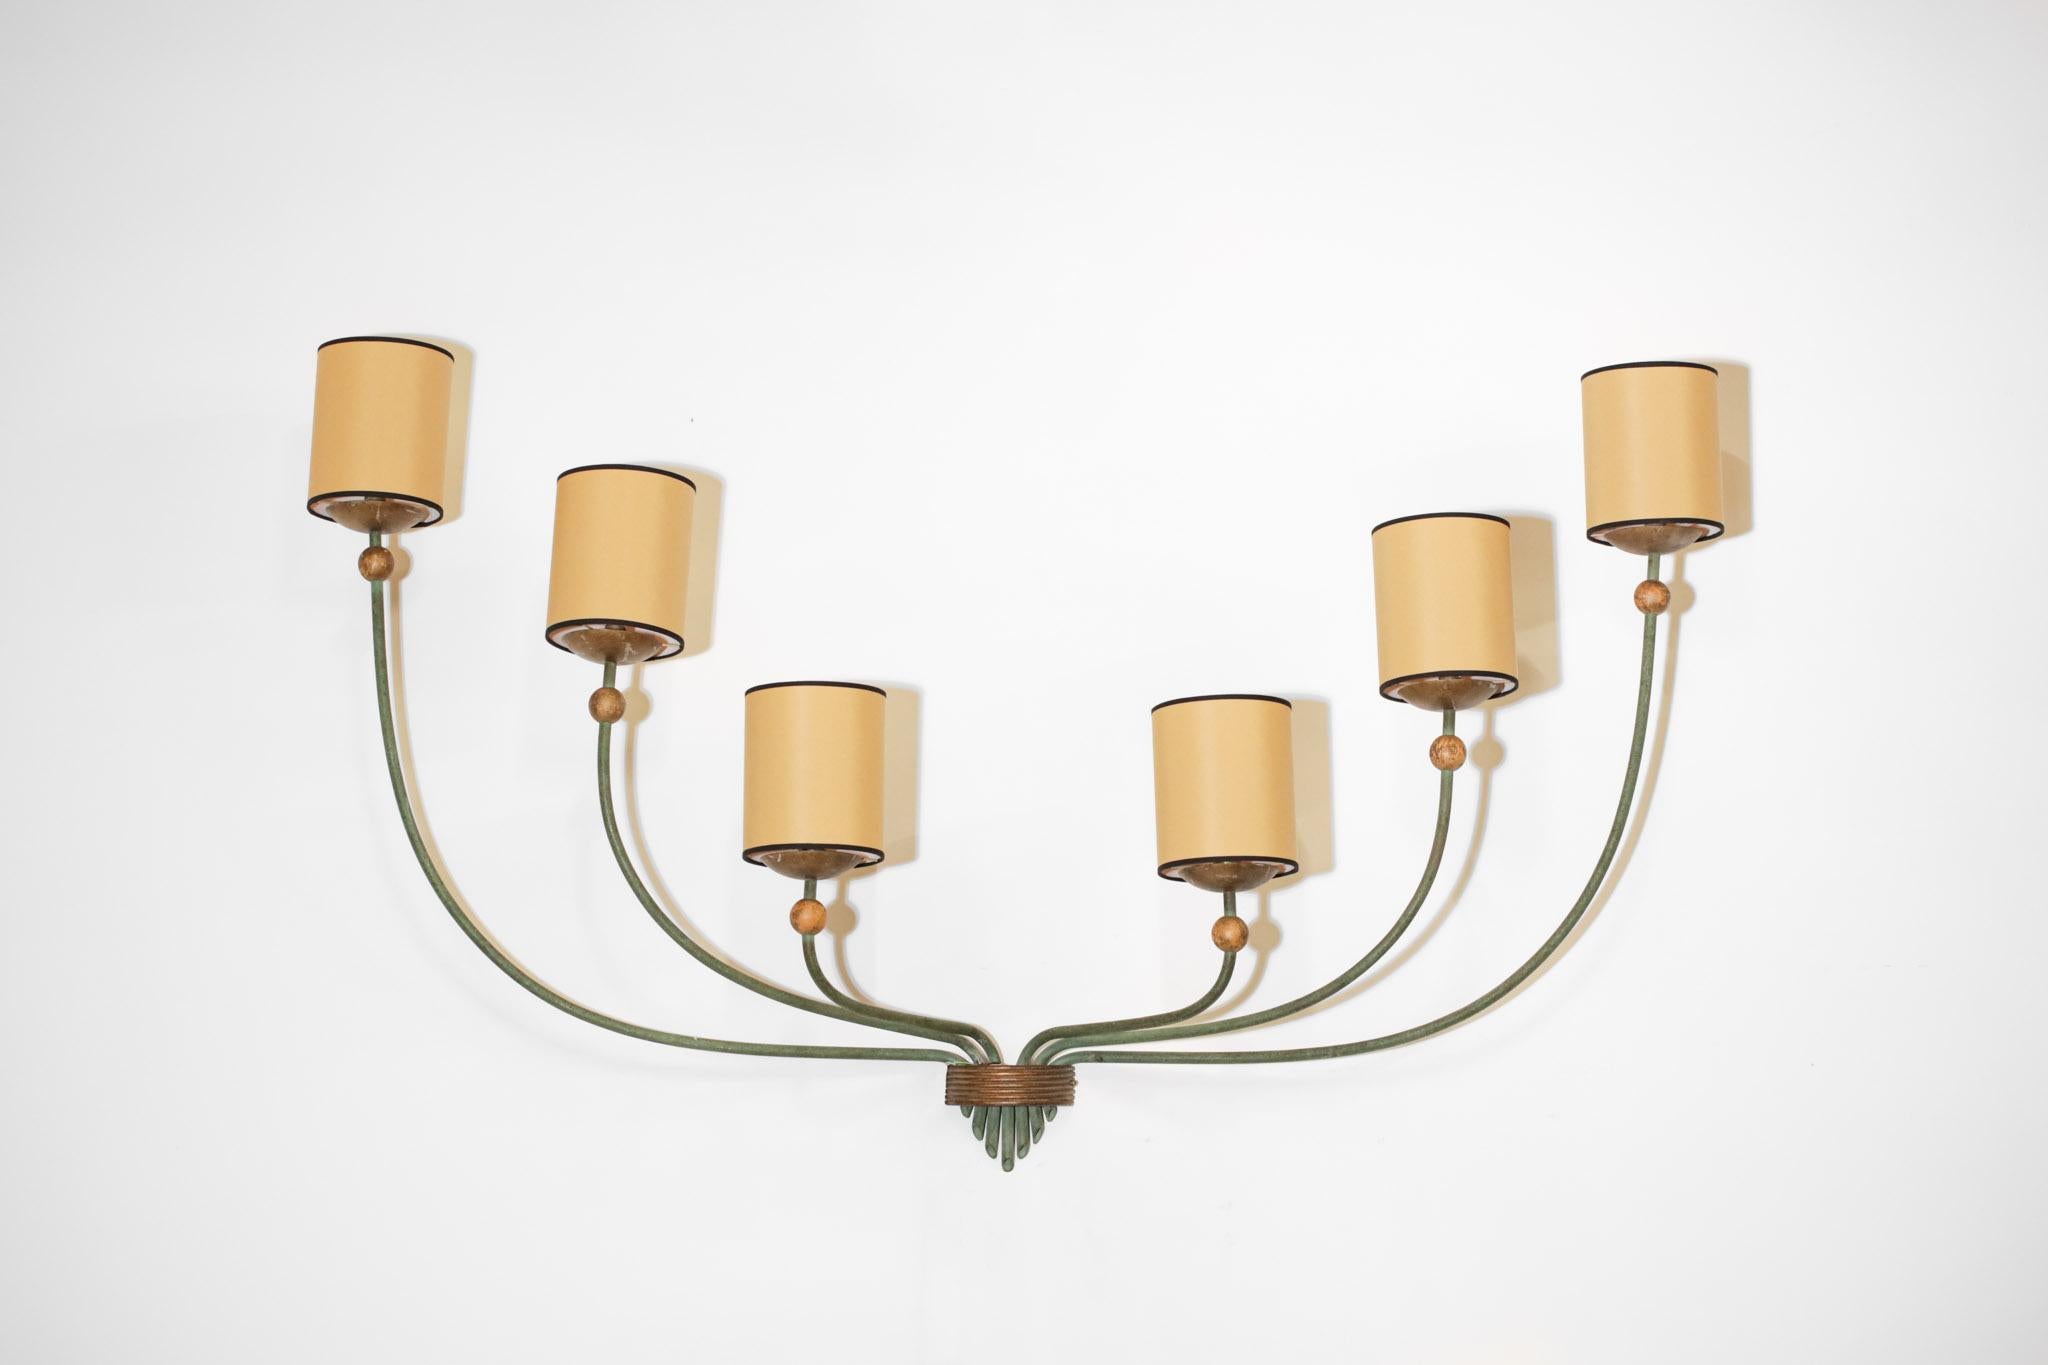 Imposing pair of Art Deco sconces from the 30's in the style of Jean Royère's work. Structure of the sconces in green lacquered metal and brass (for the cups and the central attachment), lampshade refurbished. Beautiful patina of time on the